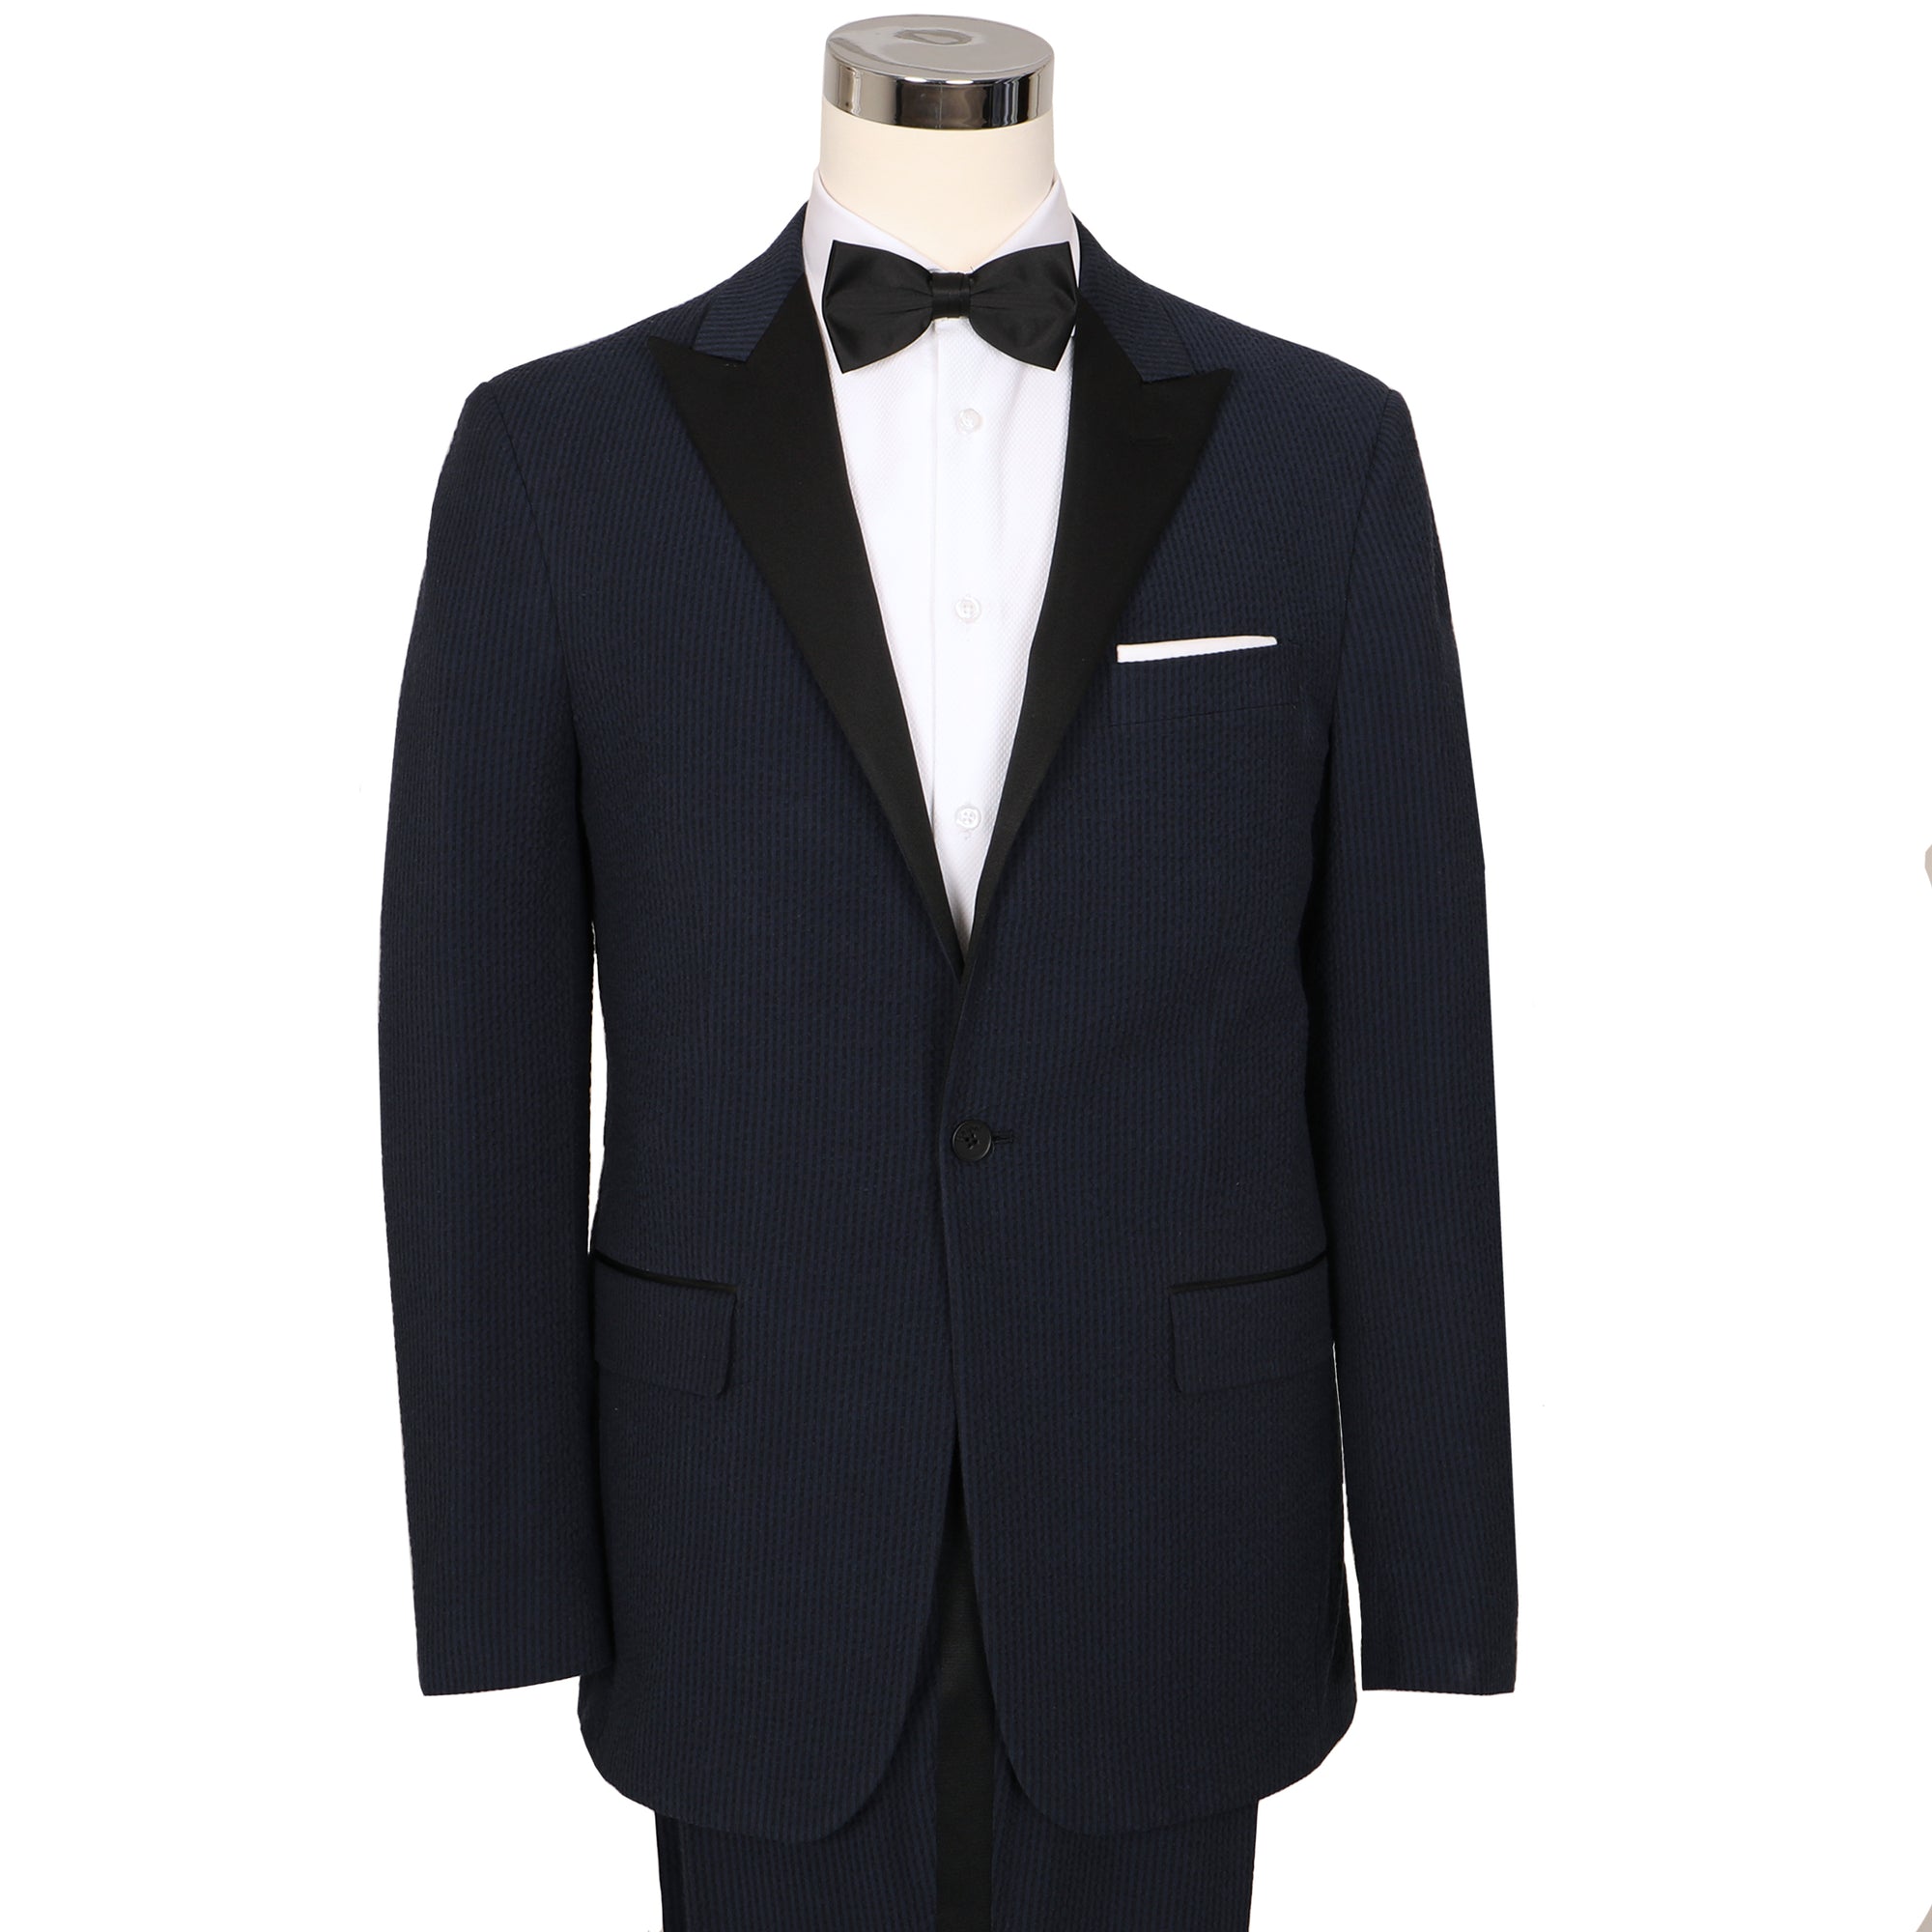 Stand out in a room full of penguins with this navy/black masterpiece. Bond ain't got nothing on you in this seersucker tux. Nail those new moves with stretch.  ** Pant waist is 6" smaller than the chest measurement. For example, if you order a 40R jacket, the pant size will be 34 **